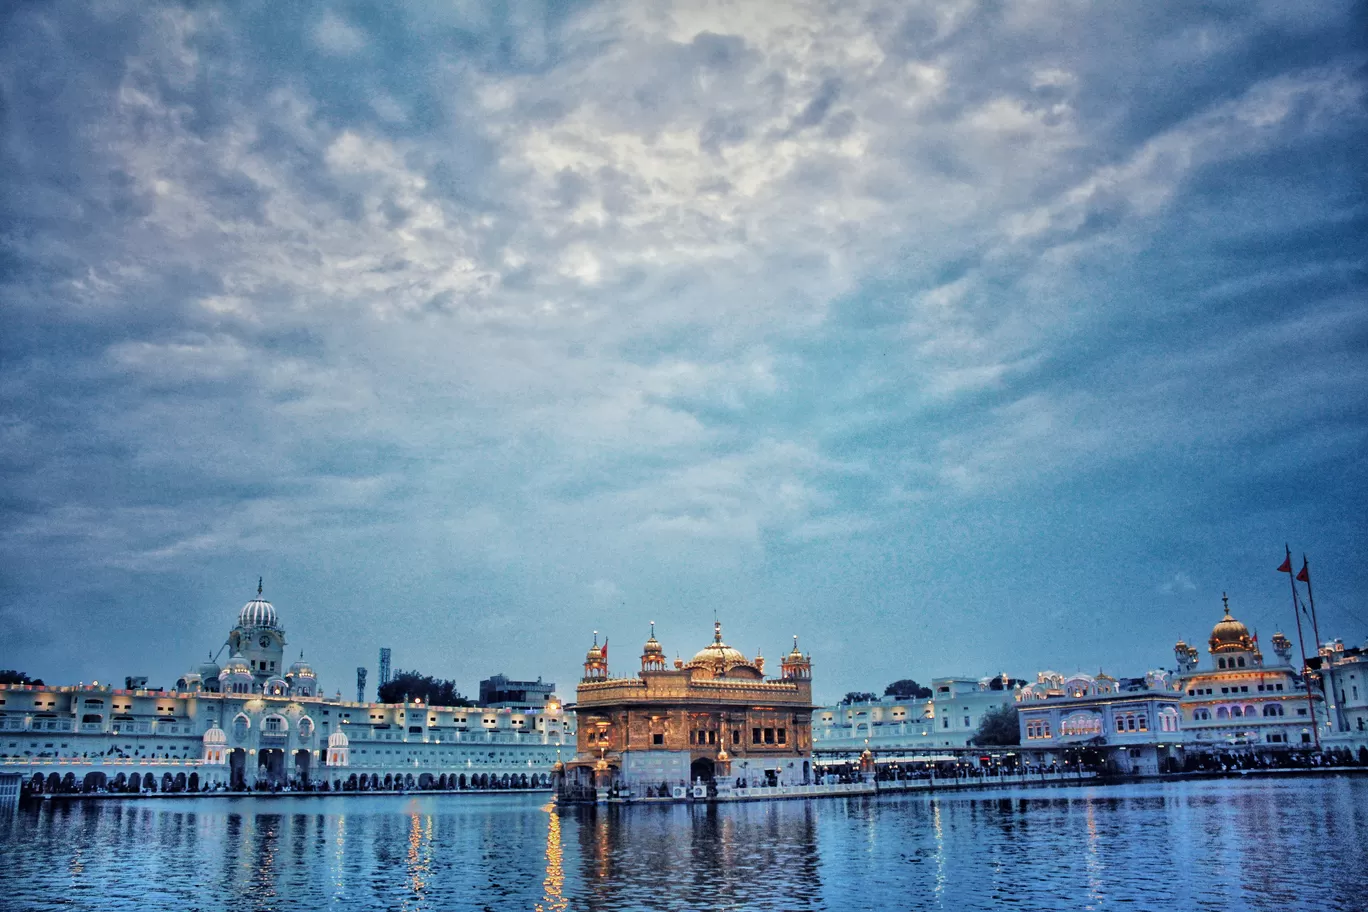 Photo of Golden Temple Amritsar - Tour Packages - Sightseeings By aditya verma